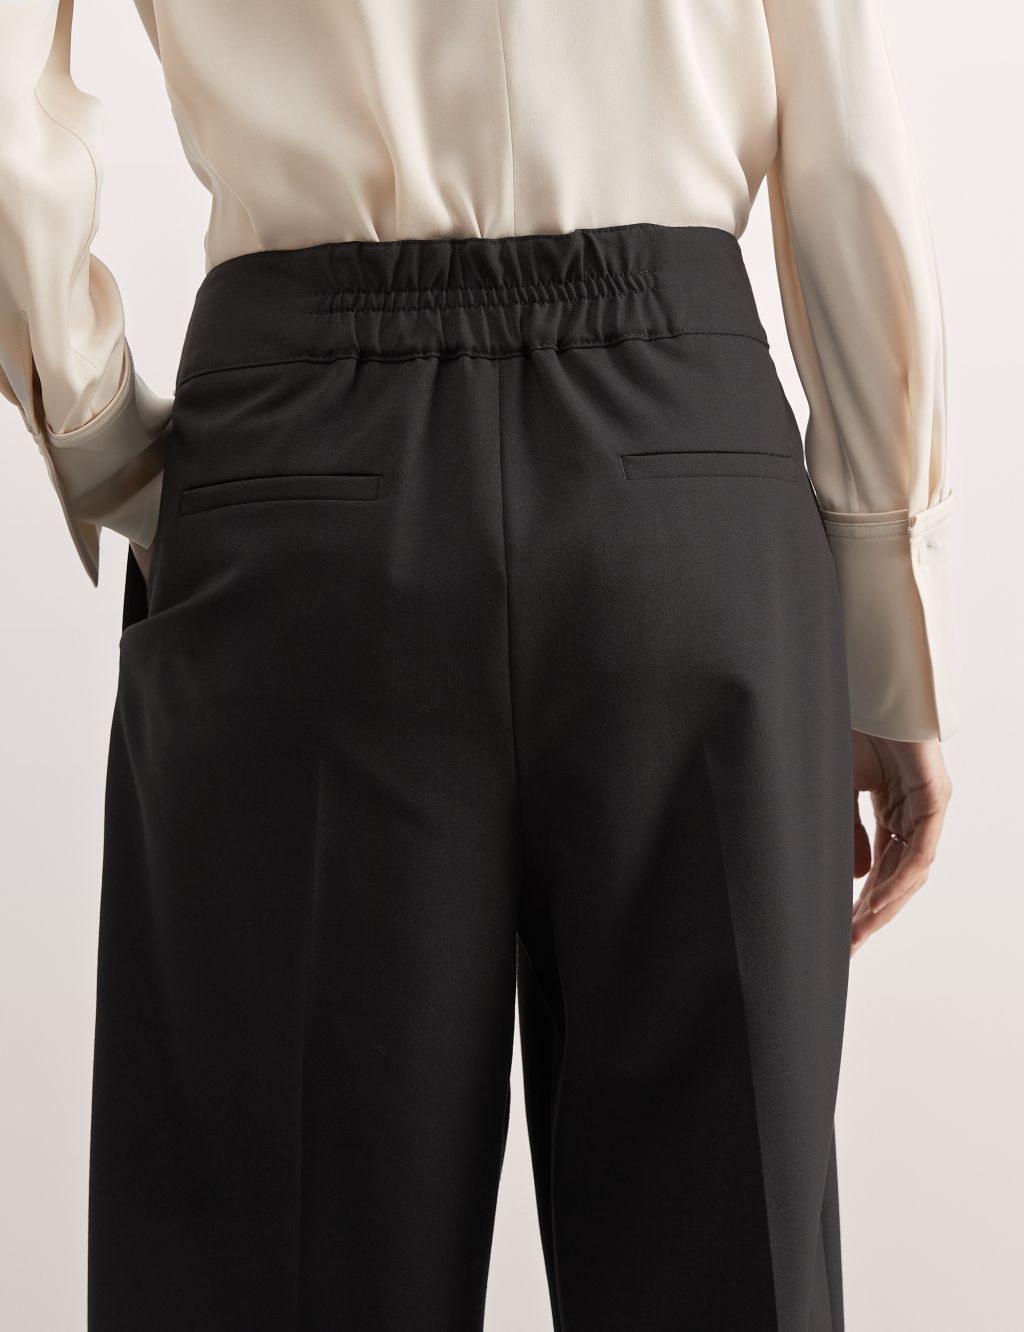 Wool Blend Tapered Ankle Grazer Trousers image 3